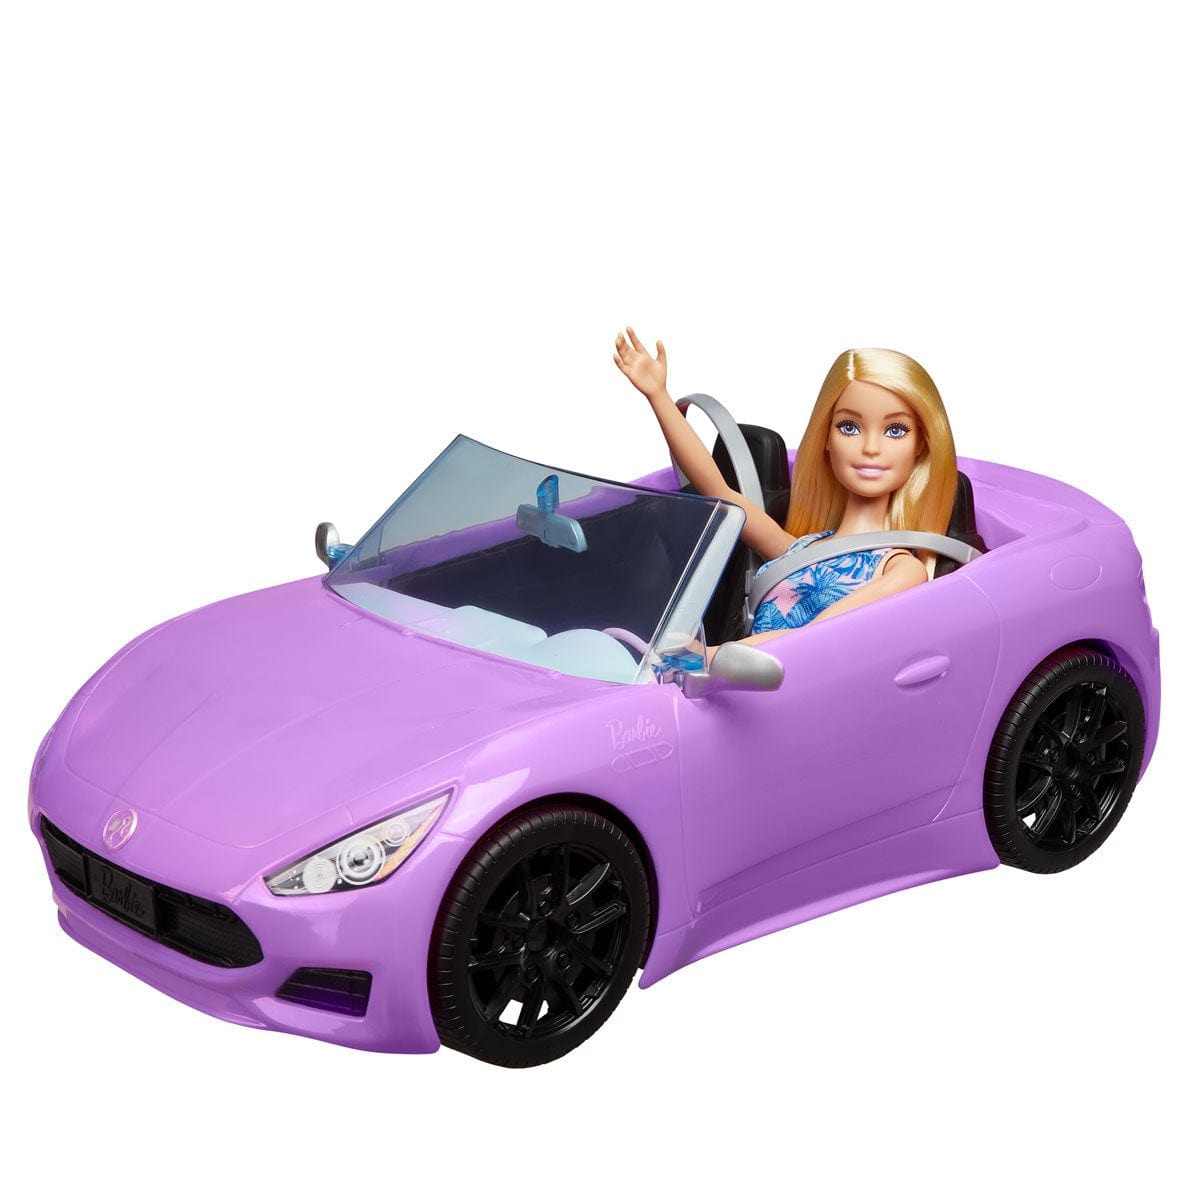 Barbie Pink Convertible 2-Seater Vehicle with Rolling Wheels and Barbie Doll with Flower Dress included